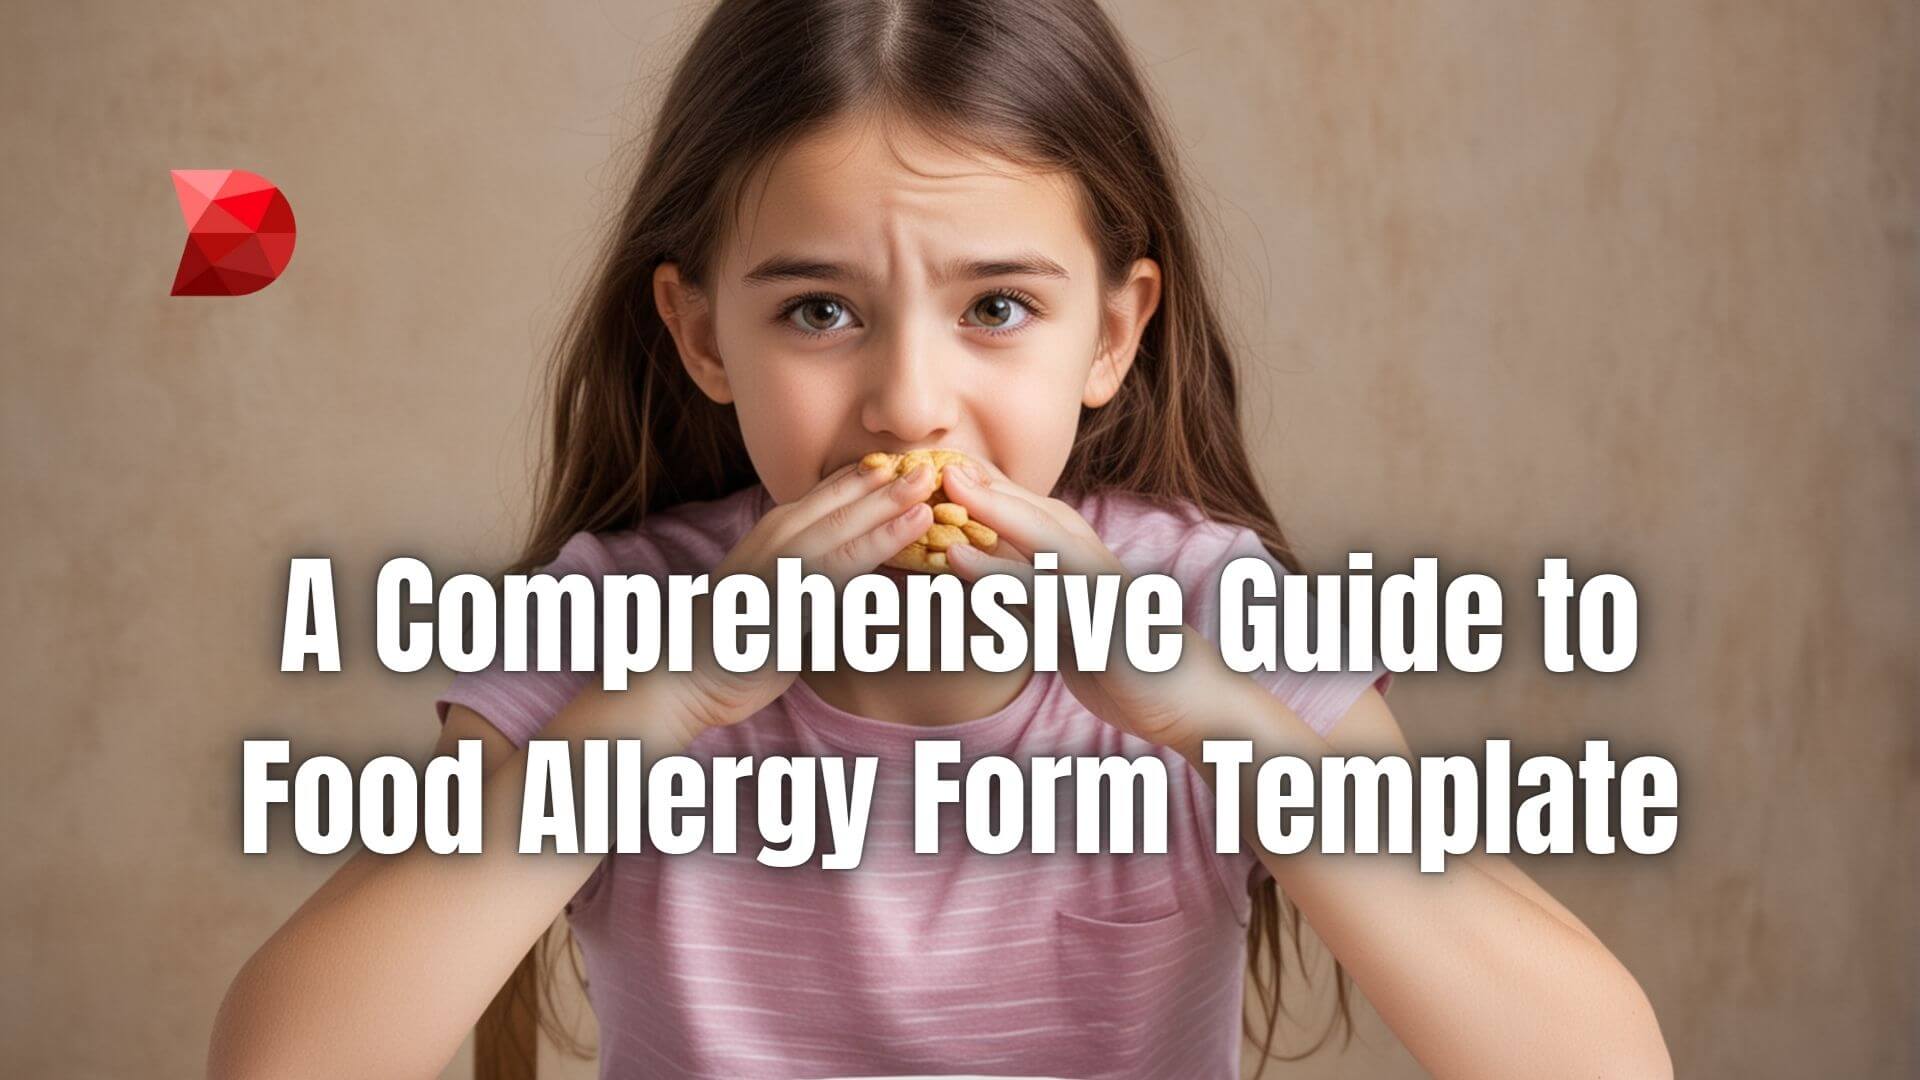 Discover the essential guide to creating a printable food allergy form template. Click here to simplify your process and ensure safety.